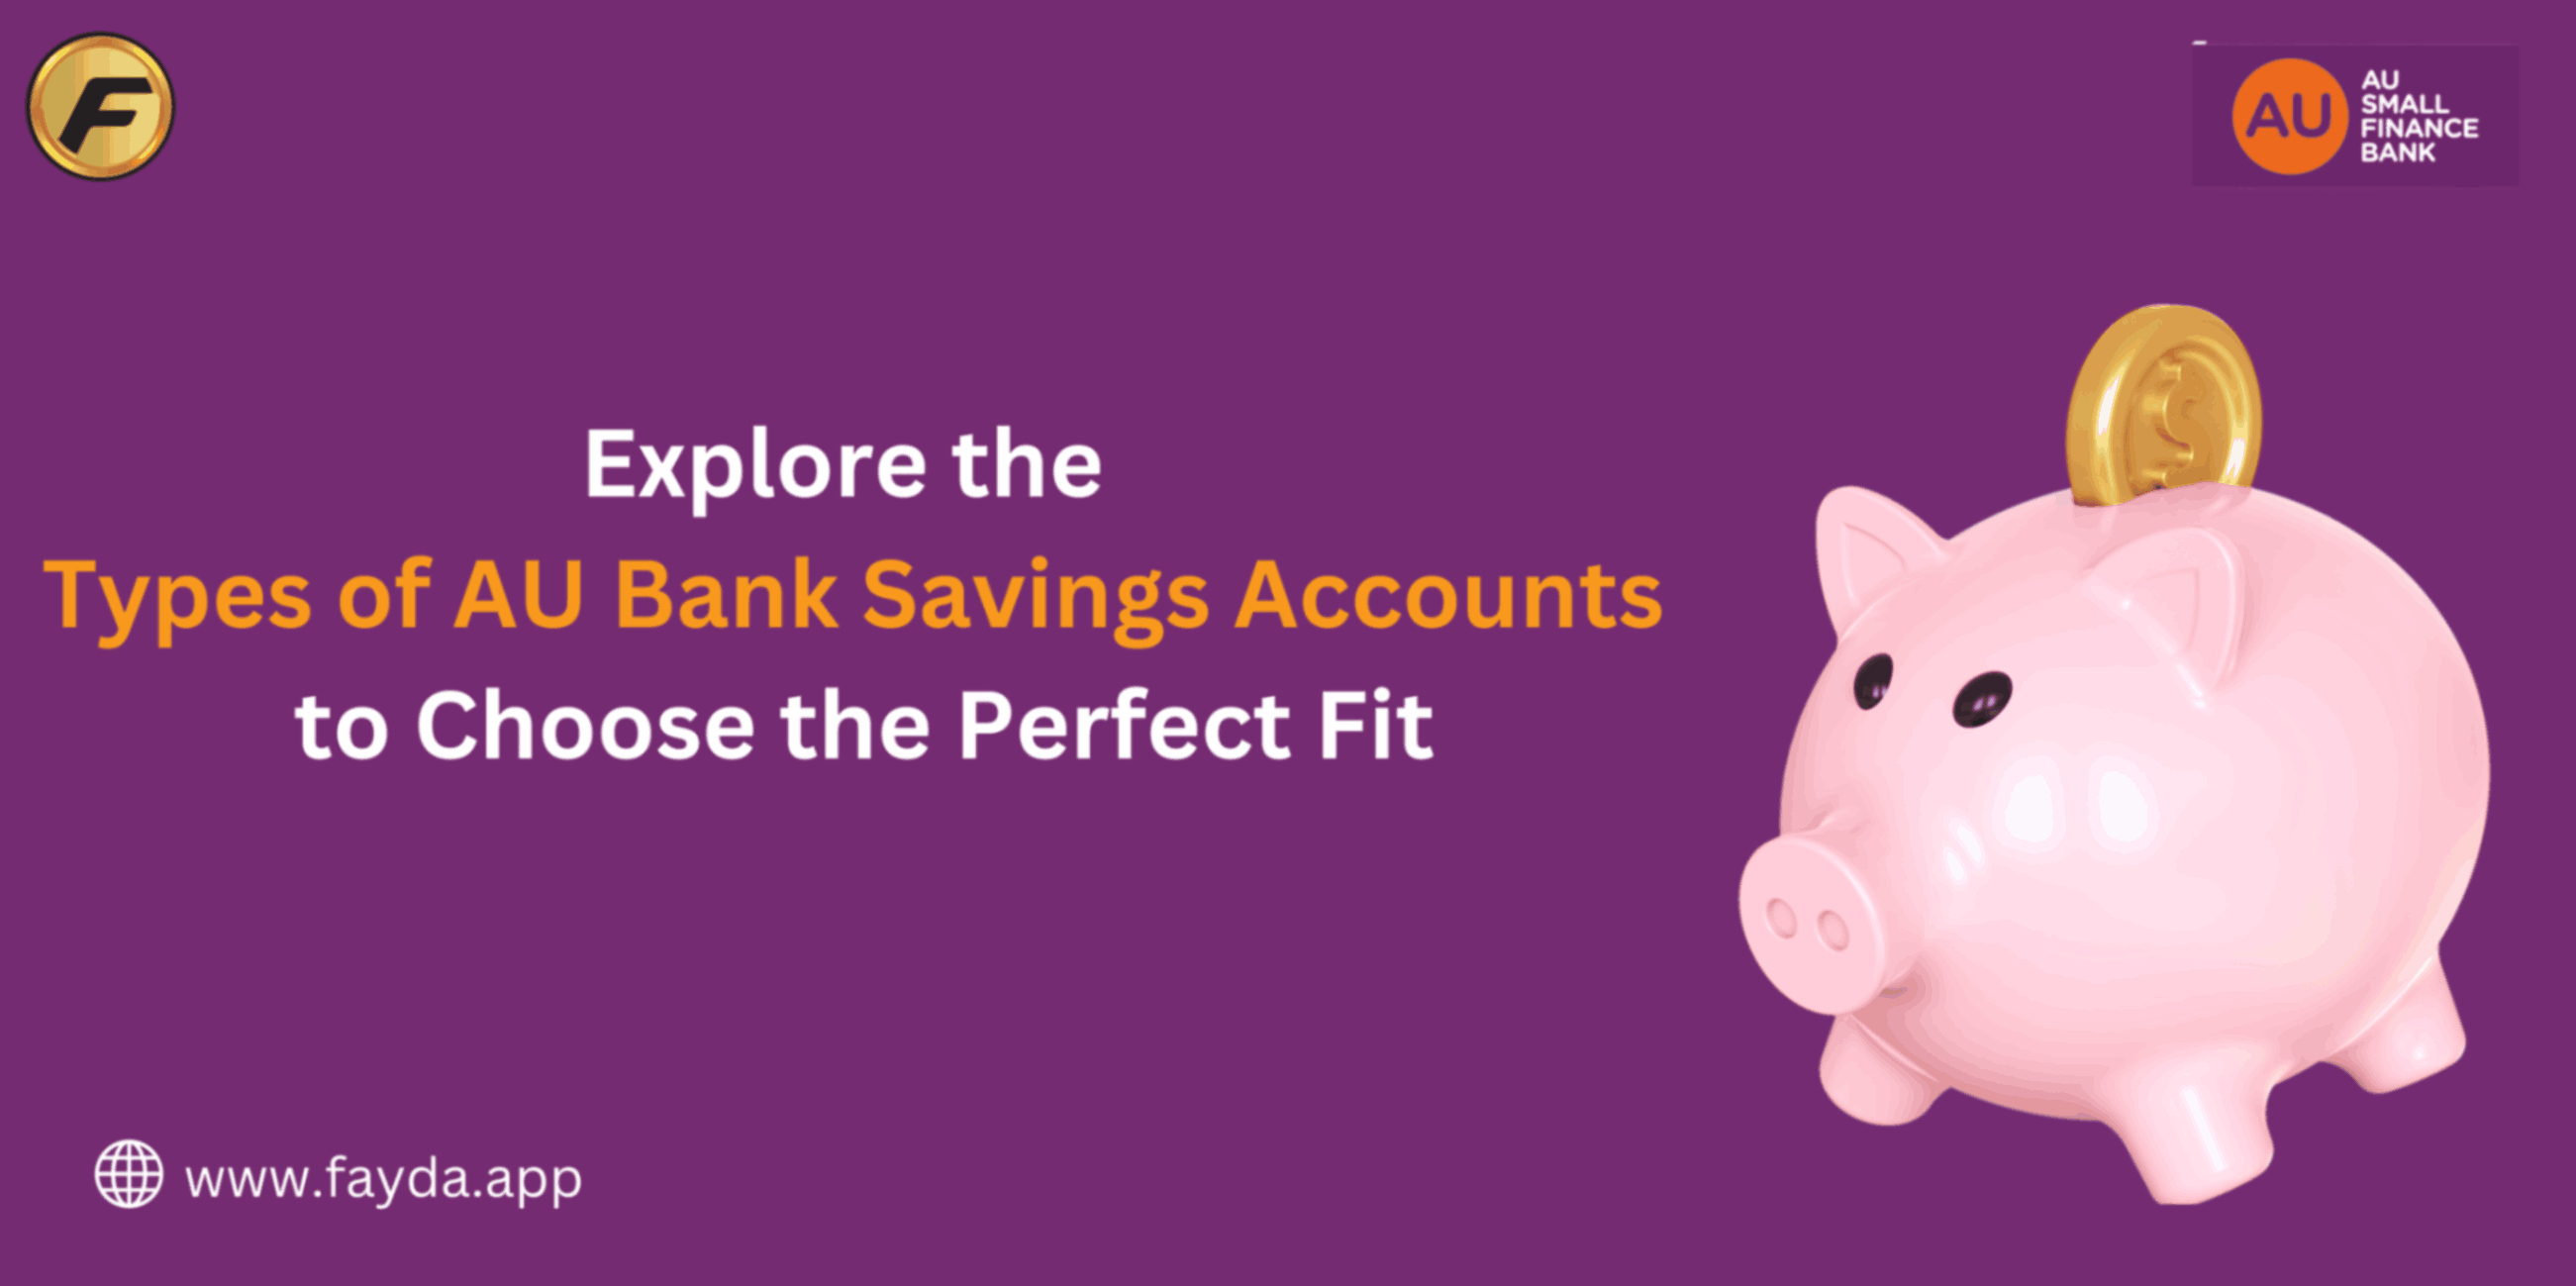 Explore the Types of AU Bank Savings Accounts to Choose the Perfect Fit